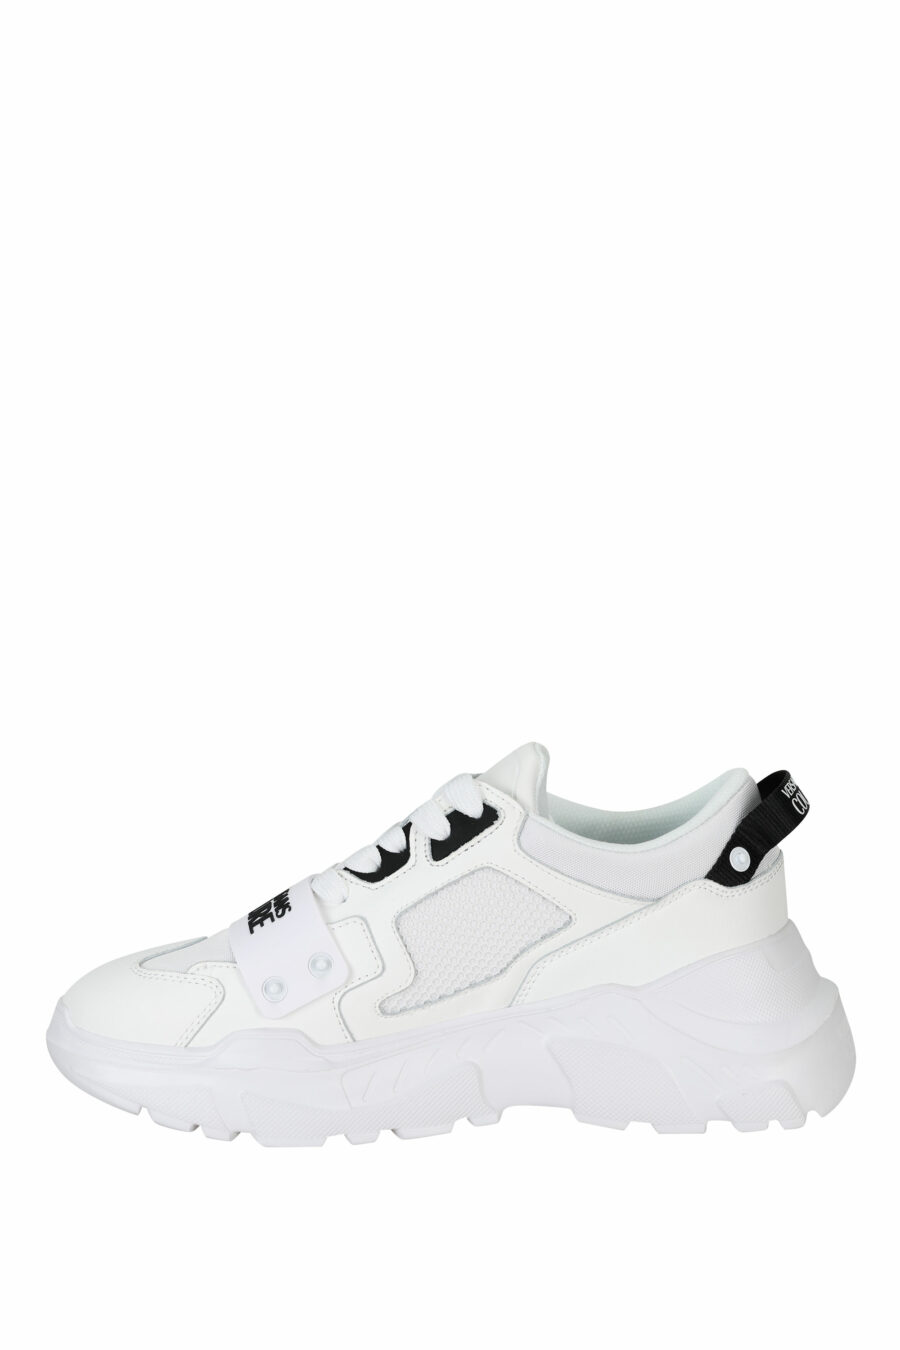 White "speedtrack" shoes with black rubber mini-logo on the front - 8052019604337 2